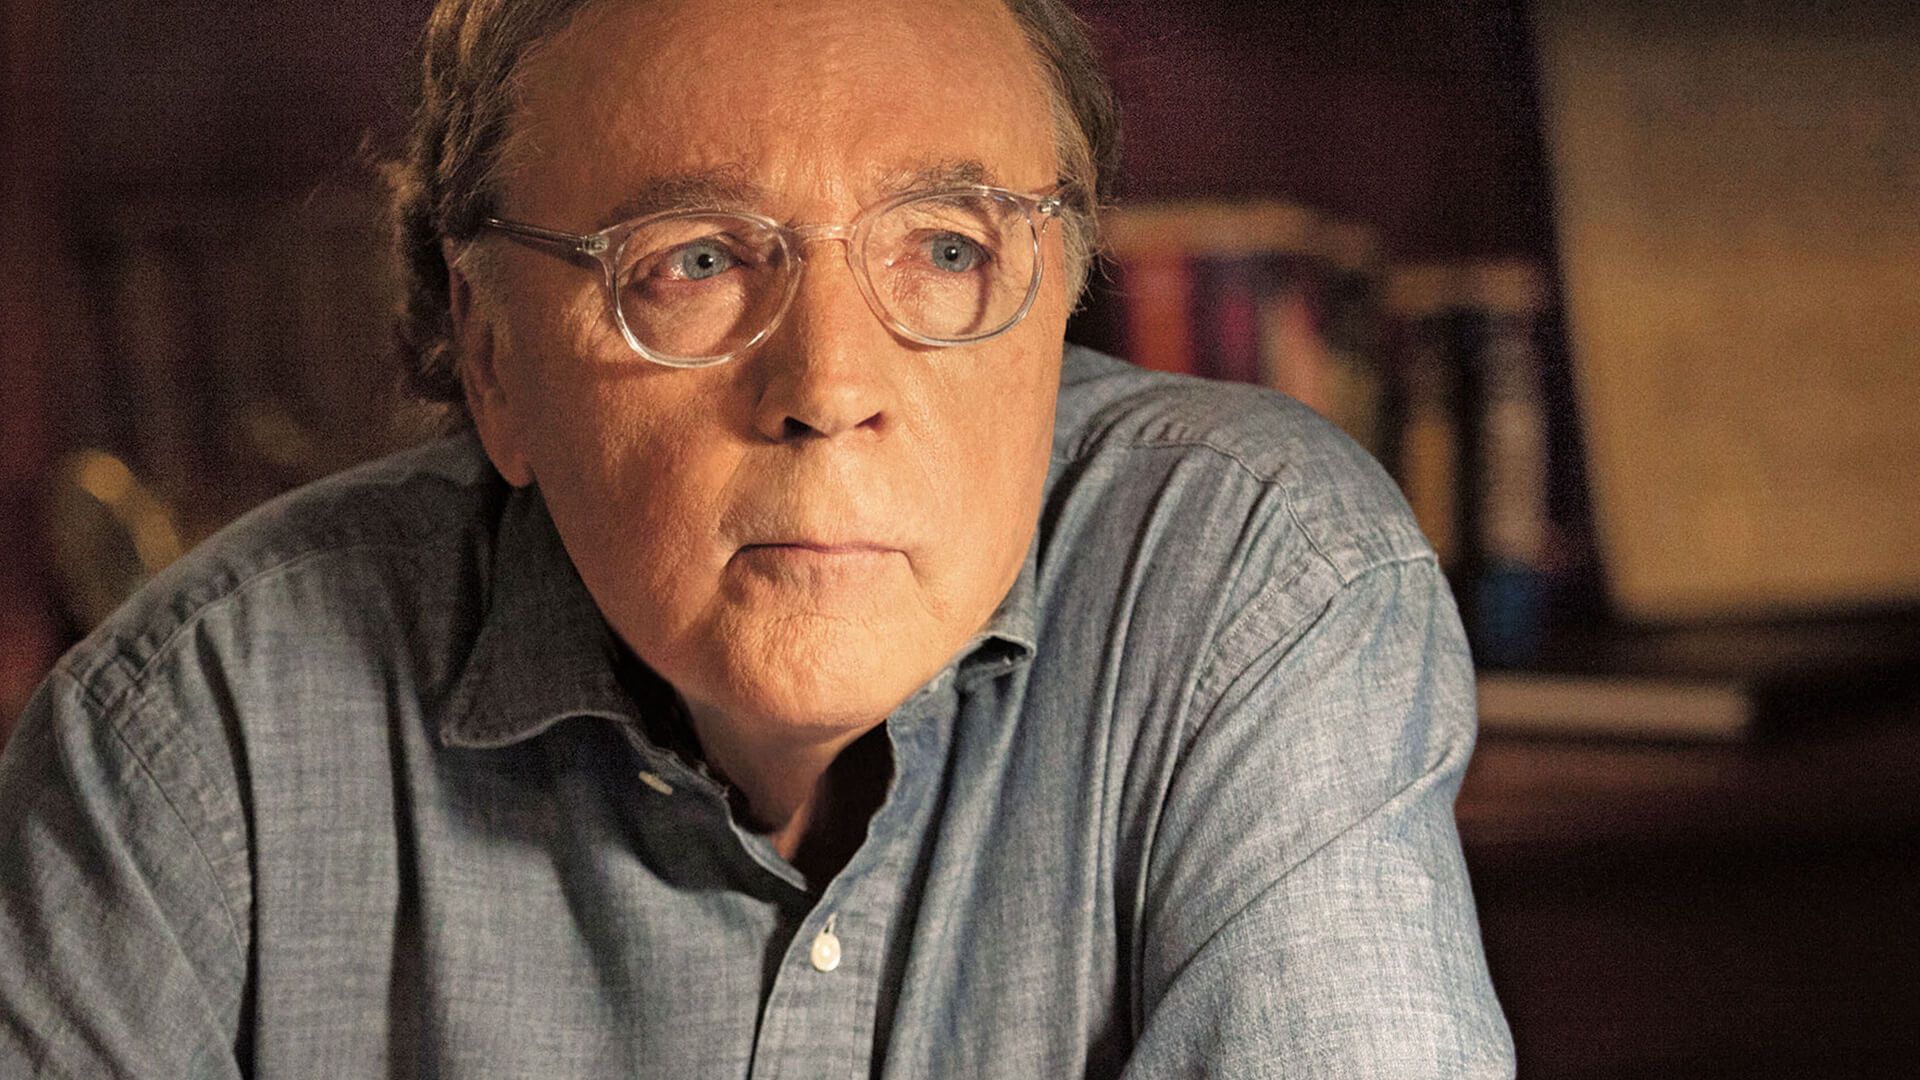 The Bookseller - Rights - James Patterson completes late author